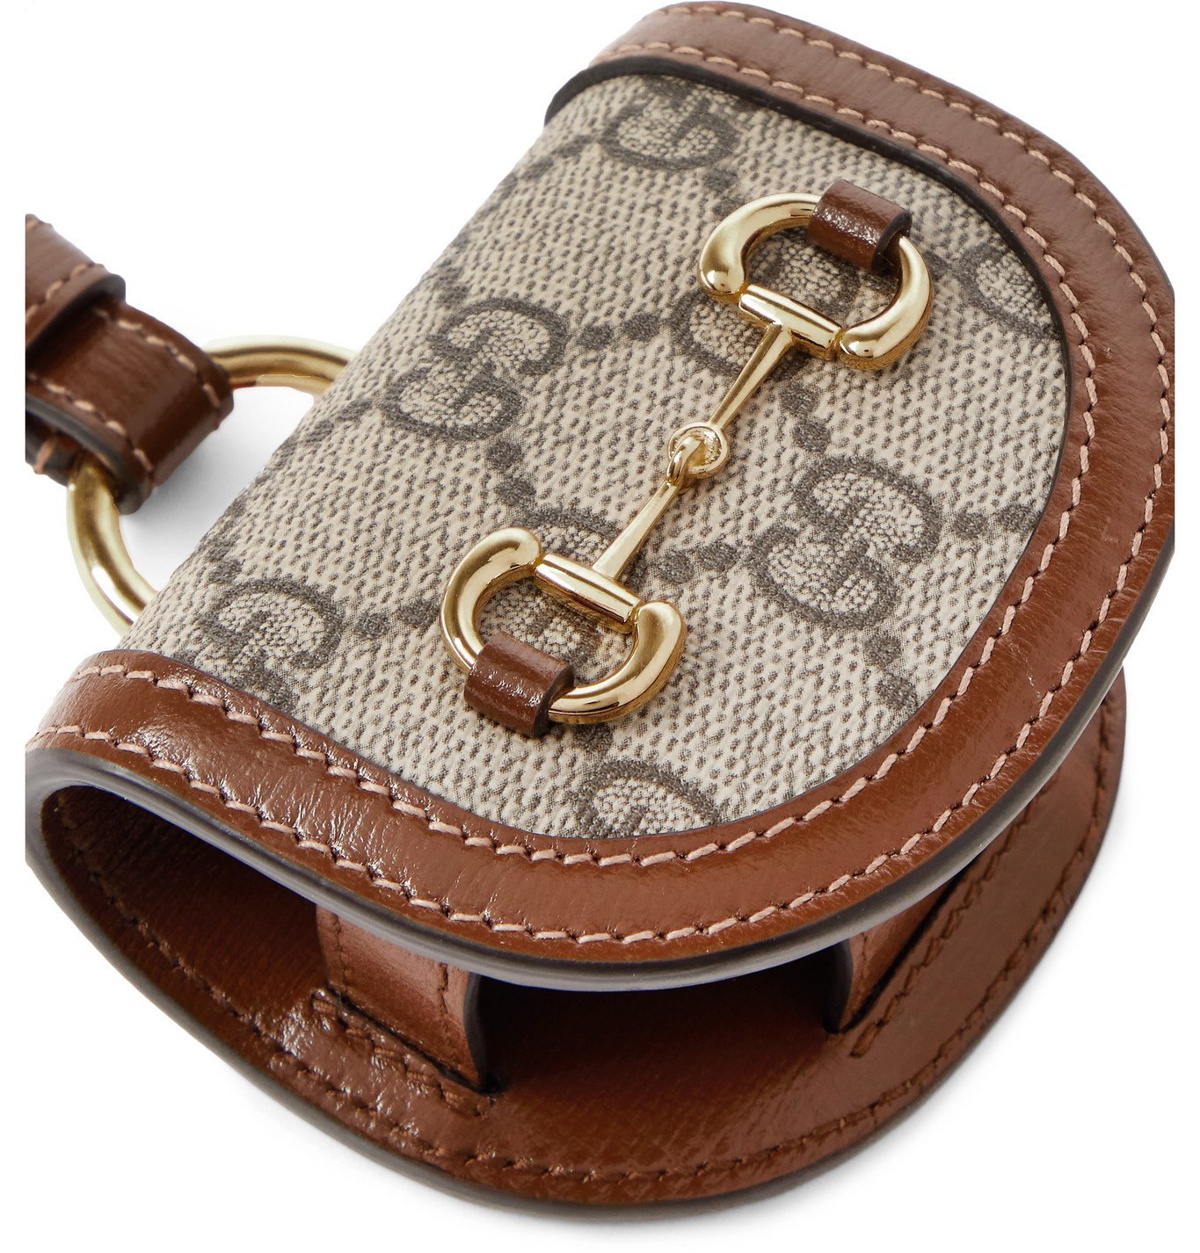 GUCCI - Horsebit 1955 Leather and Monogrammed Coated-Canvas Airpods Case  with Lanyard - Brown Gucci